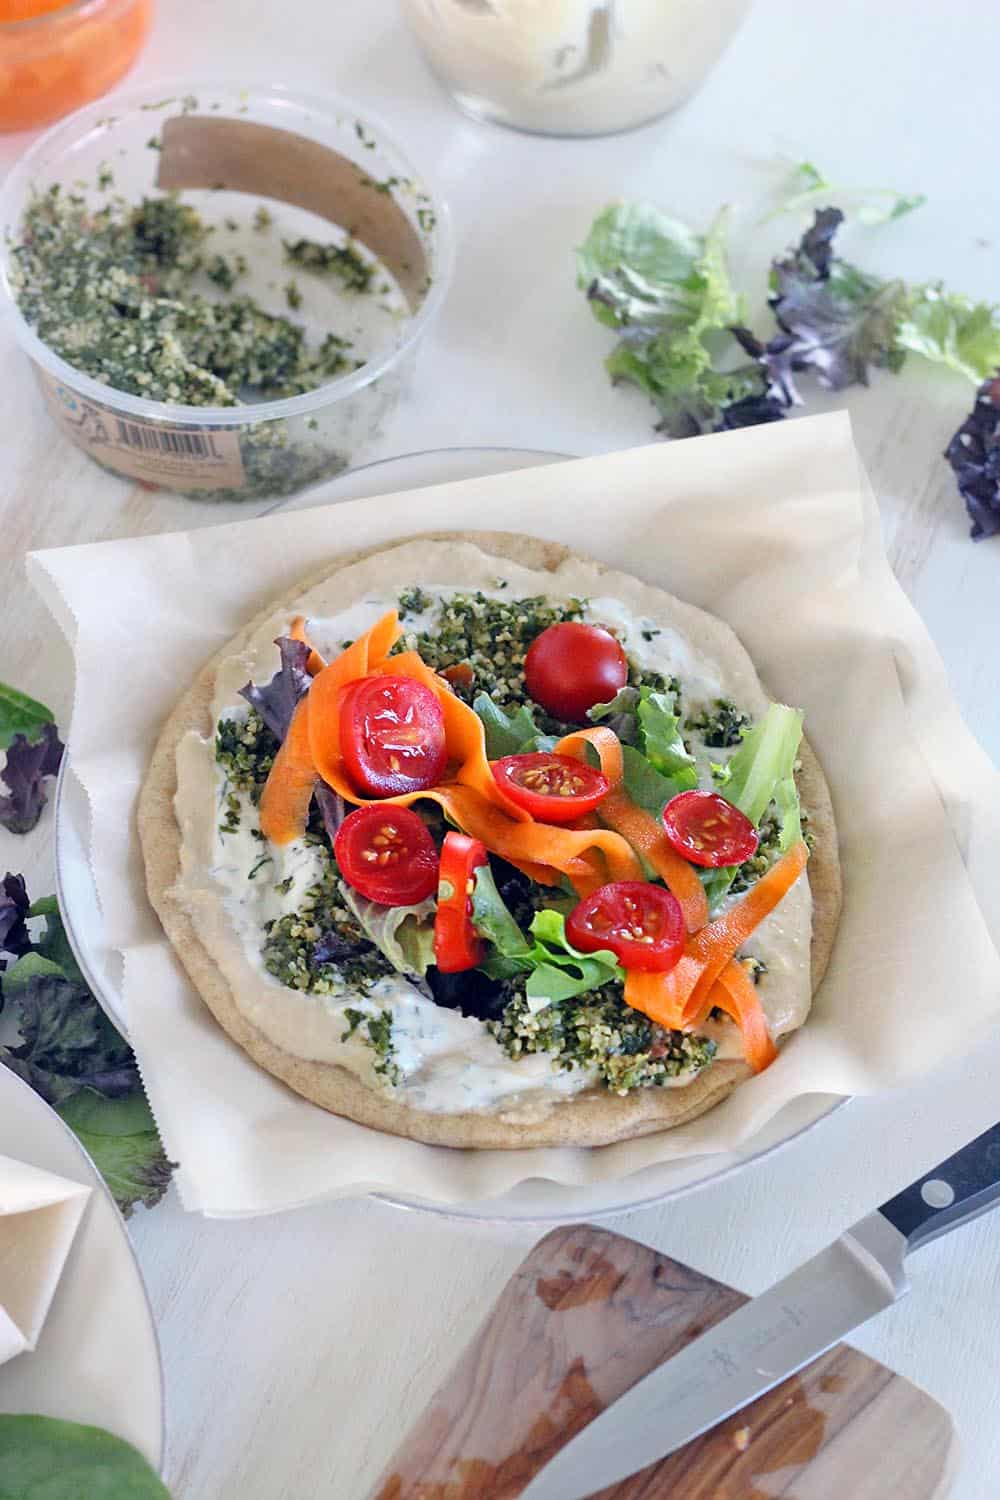 These are the ULTIMATE vegetarian pita sandwiches (vegan optional), piled high with hummus, tabbouleh, dill yogurt sauce, pickled veggies, greens, and tomatoes. Make in advance for lunch all week! #mealprep #vegetarian #sandwiches